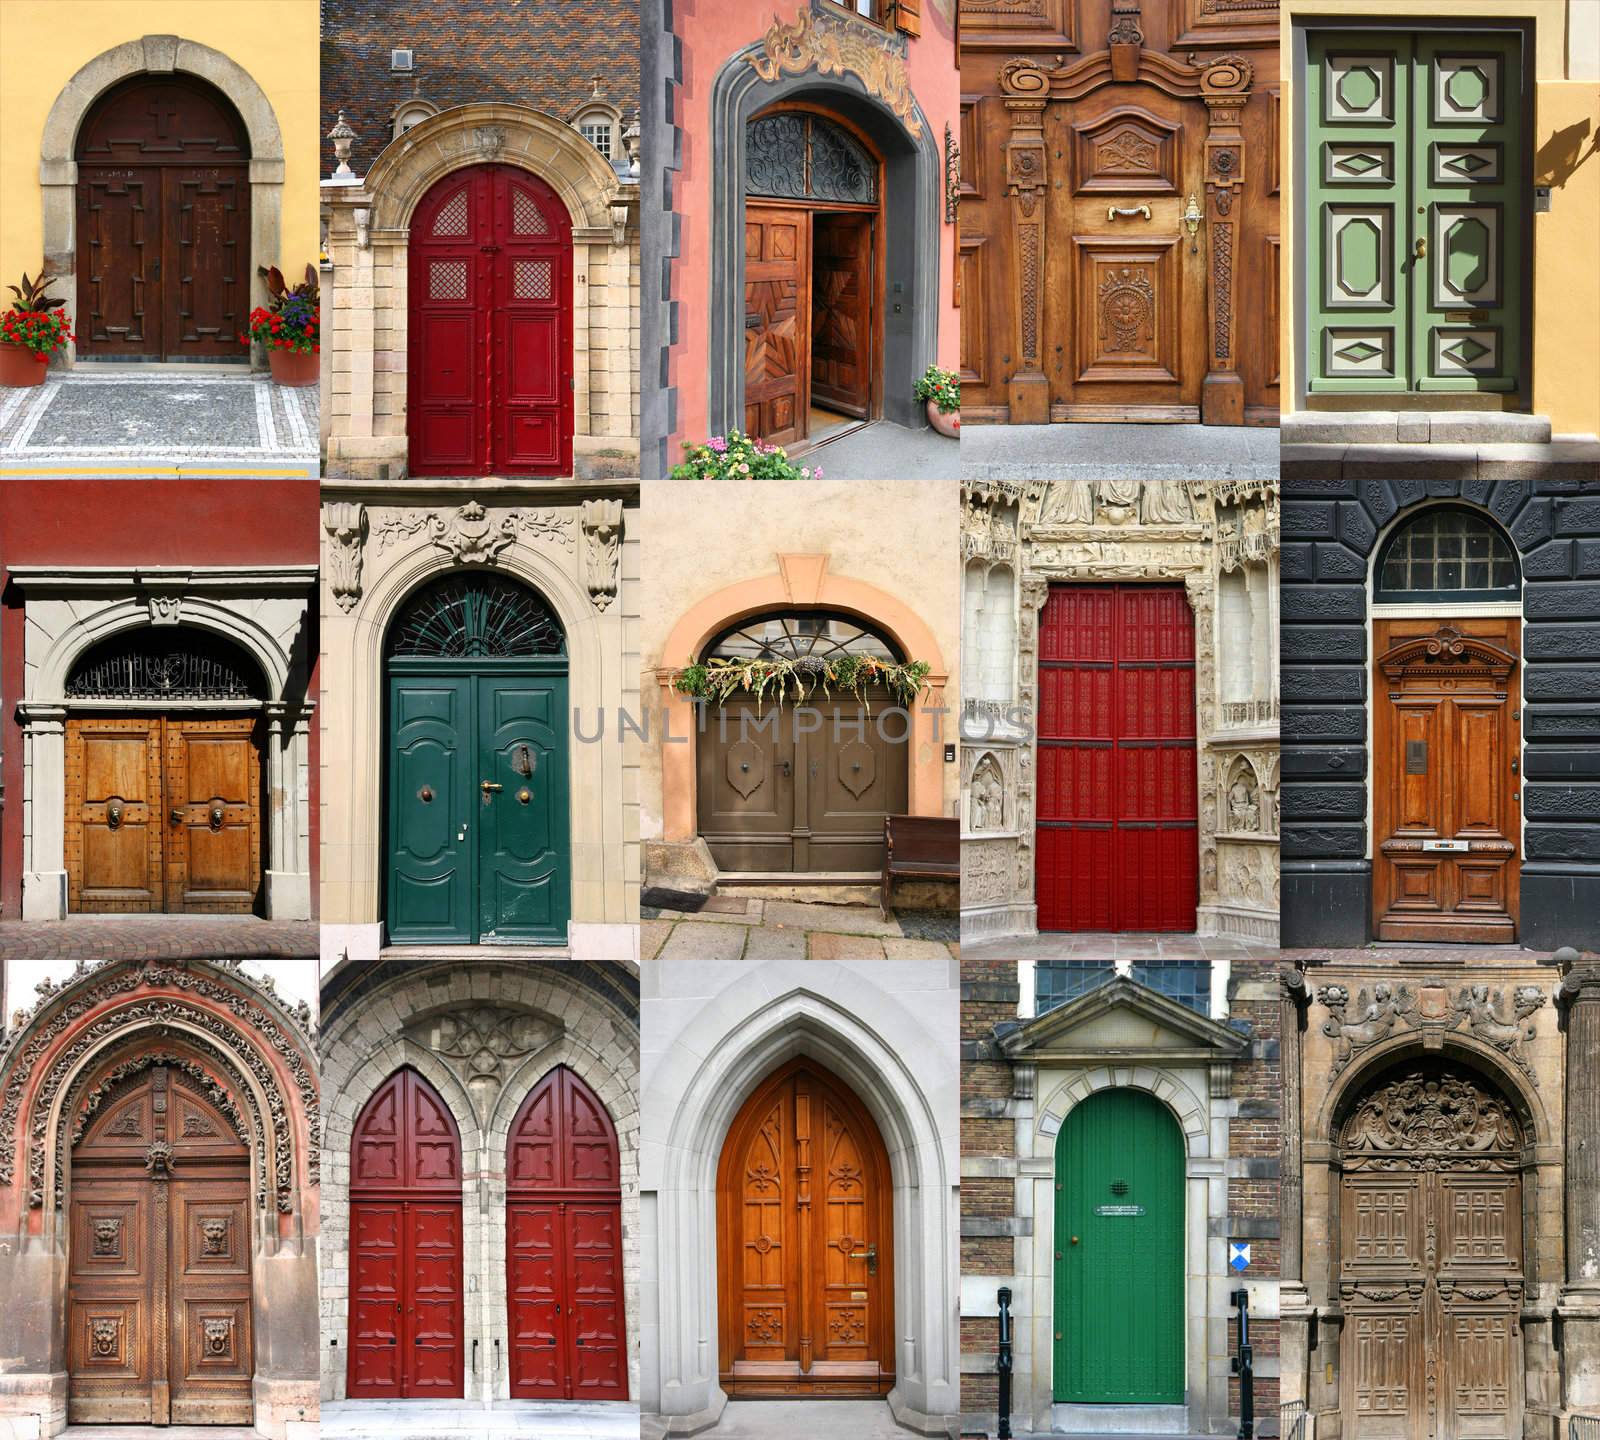 Colorful composition made of door - architecture collage. Doors from Czech Republic, France, Switzerland, Germany and Netherlands.